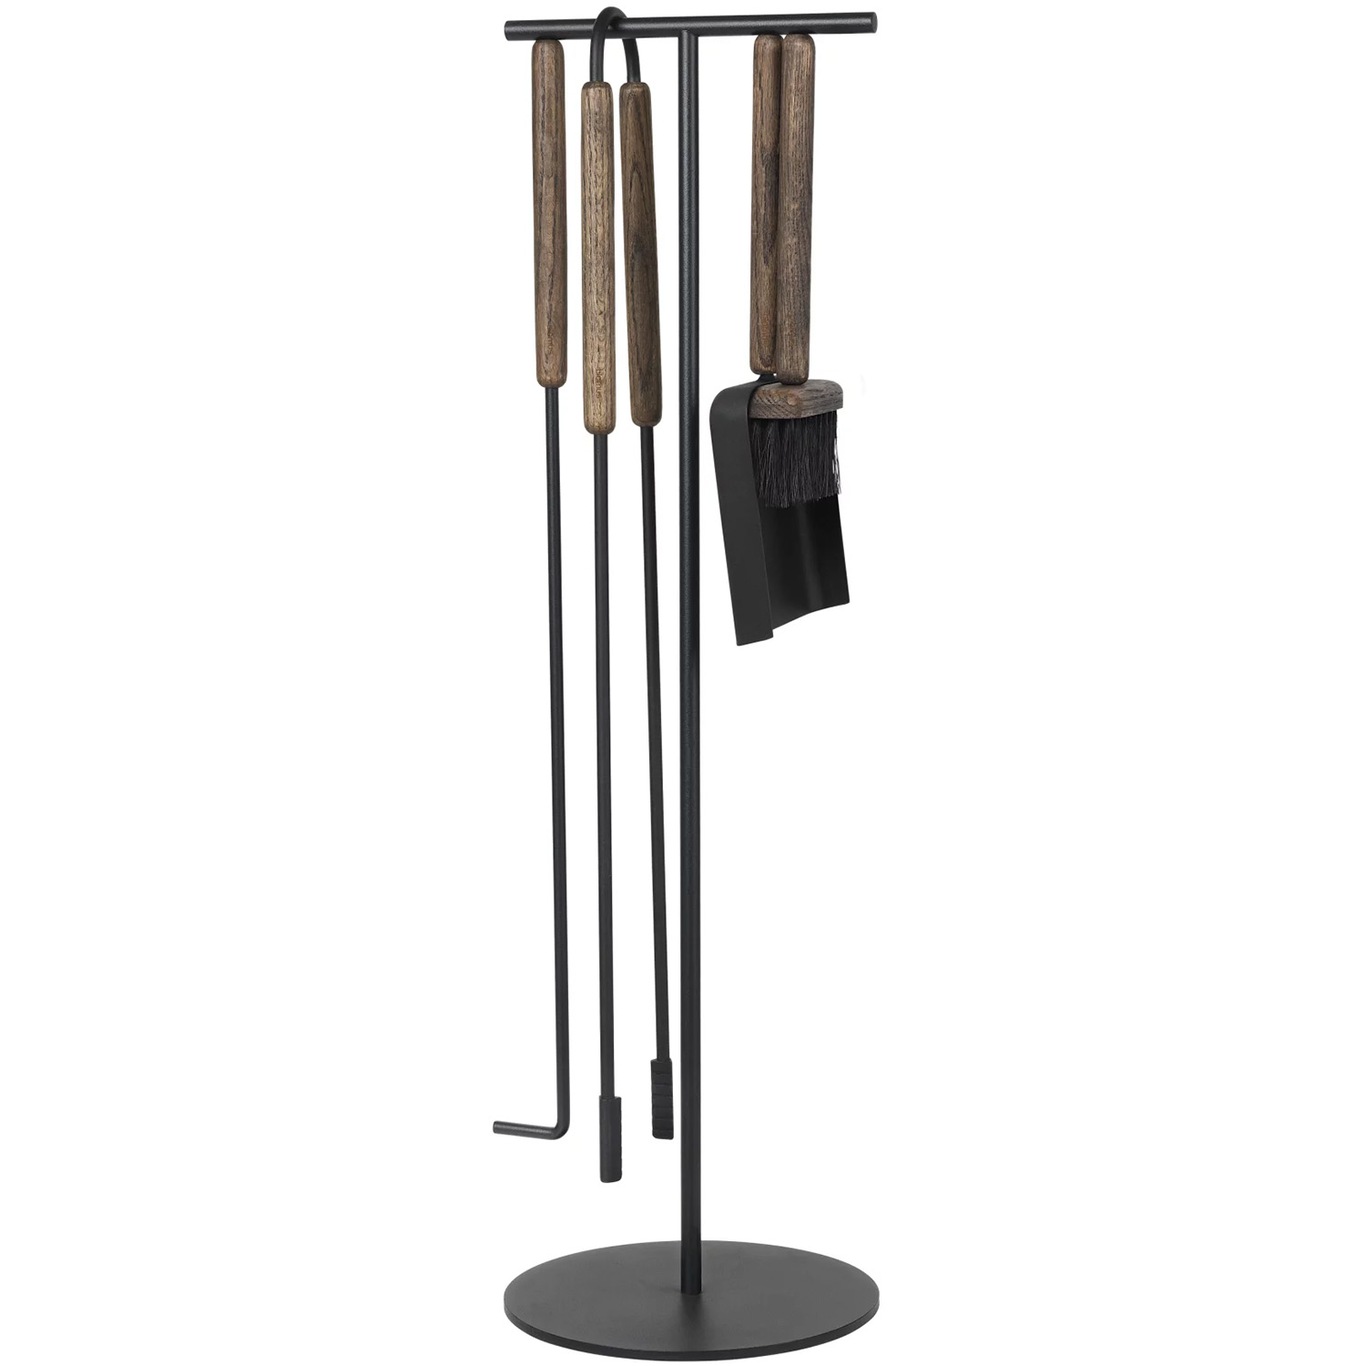 Ashi Fireplace Tools With Stand 5 Pieces, Brown